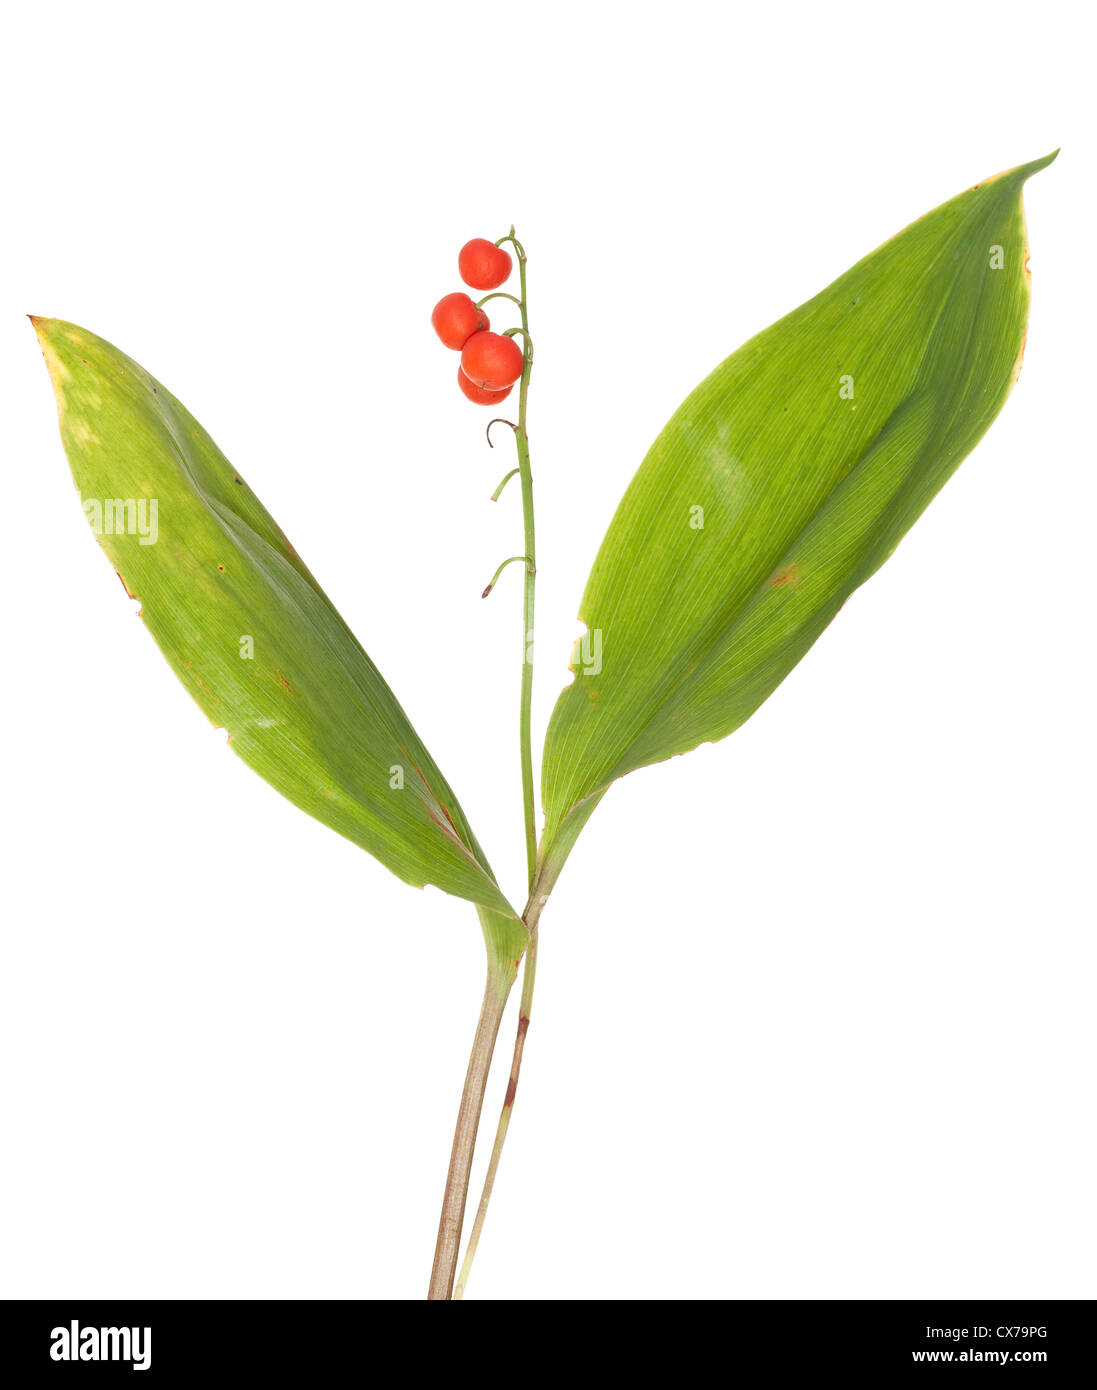 lily of the valley with leaf and fruits Stock Photo